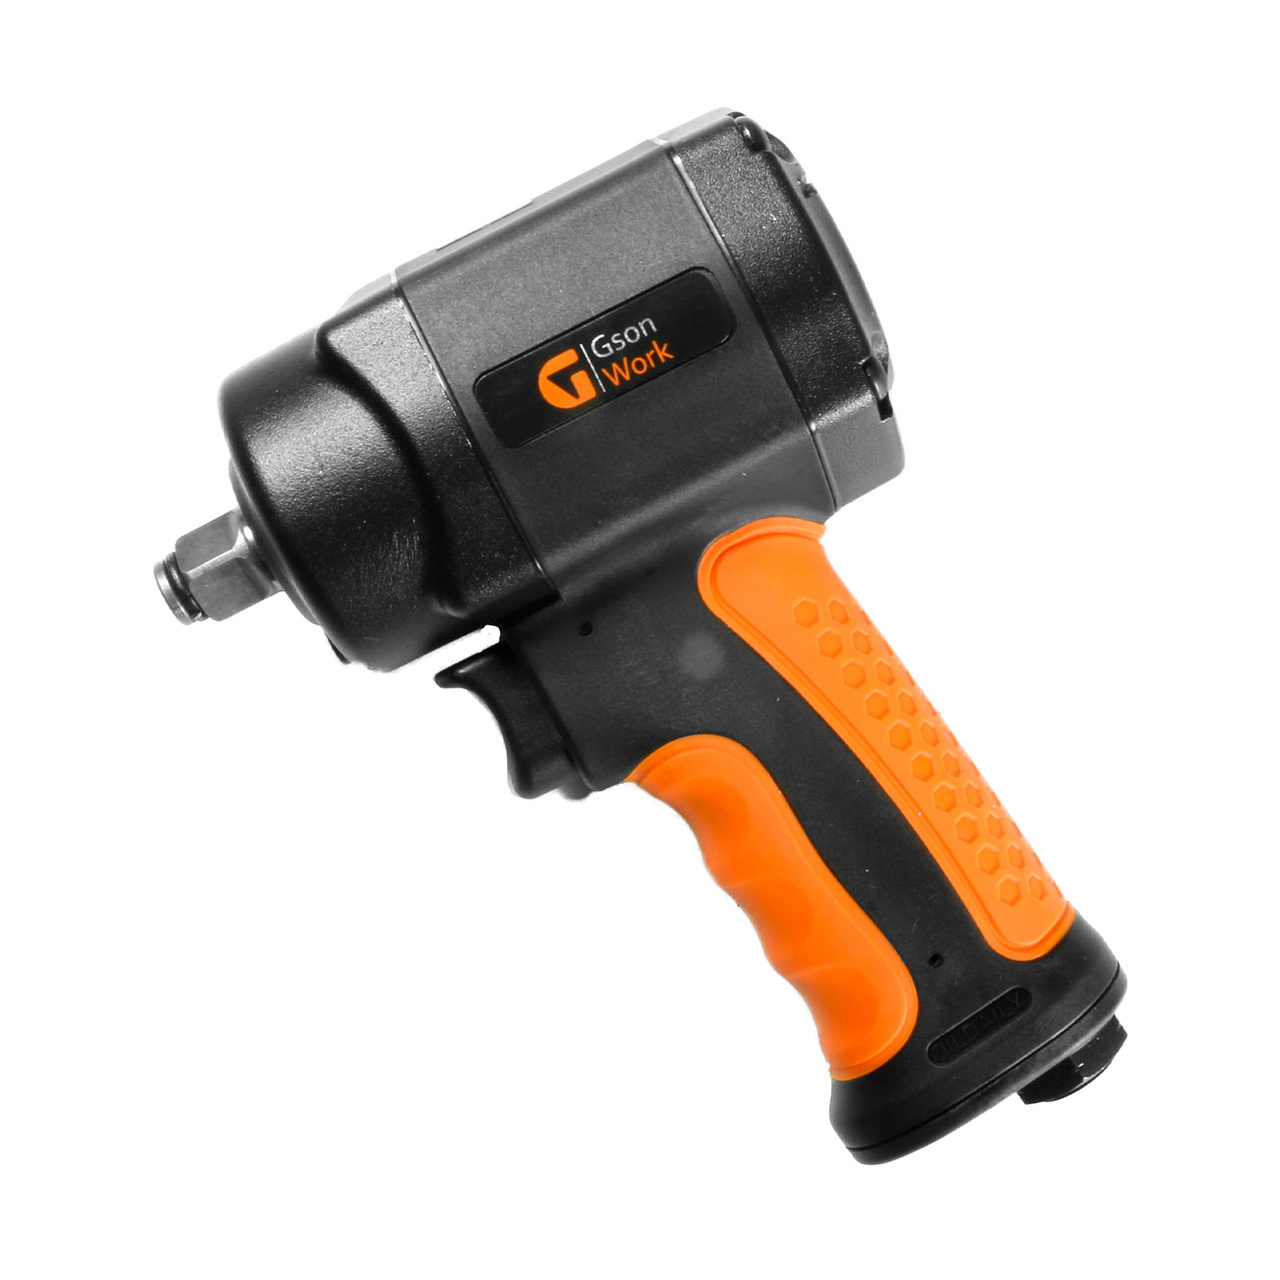 Composite Stubby Air Impact Wrench 1/2"